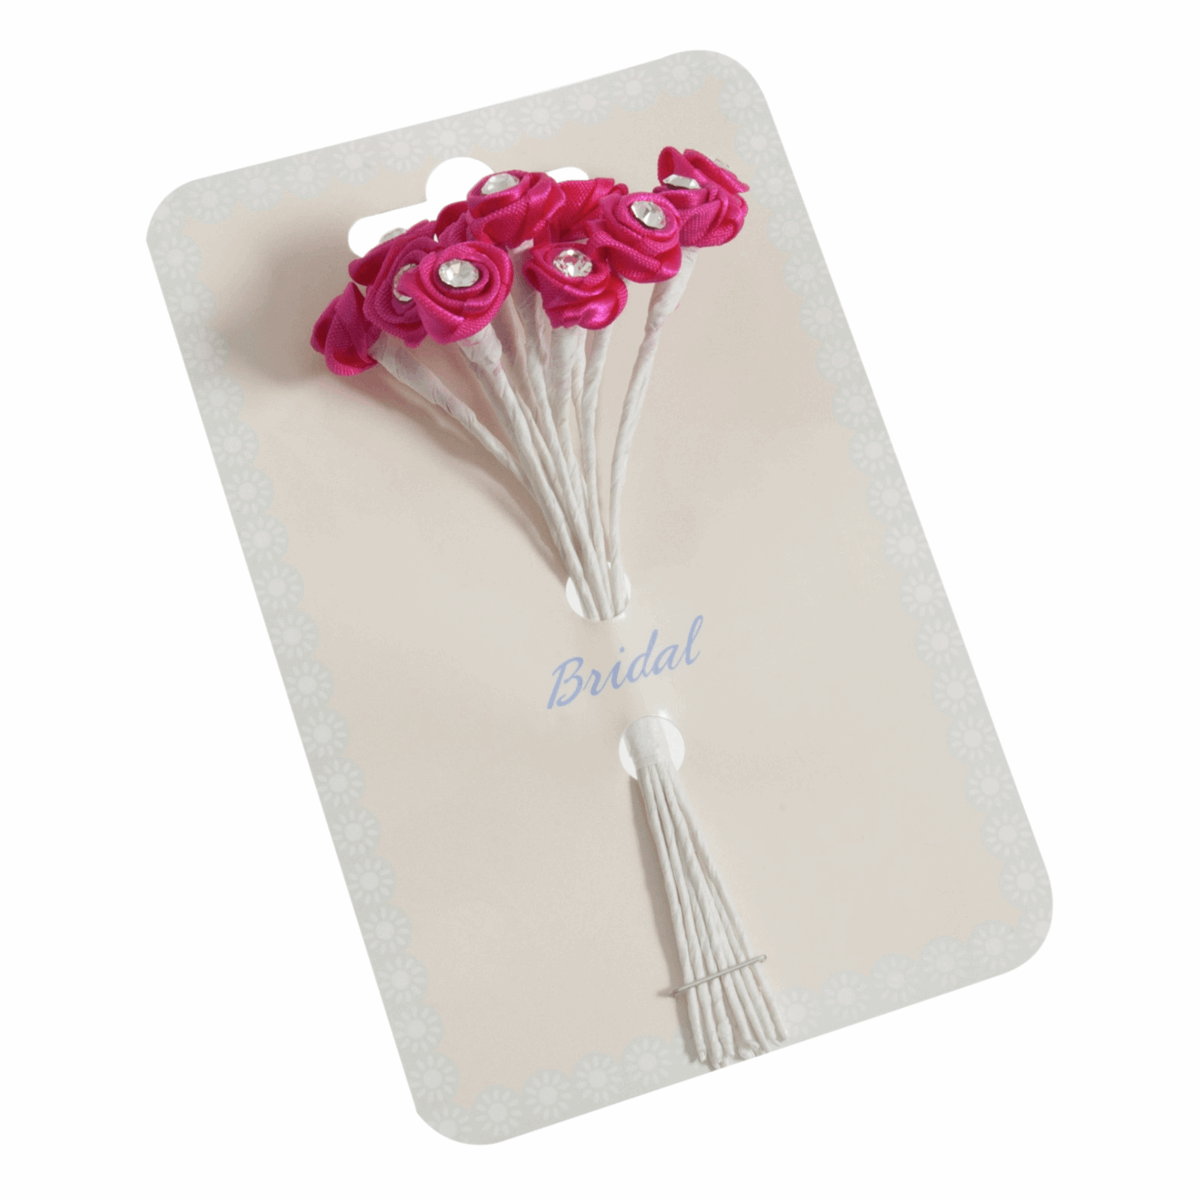 Hot Pink Ribbon Rose Flower Stems with Diamante - 13mm (Pack of 12 Stems)